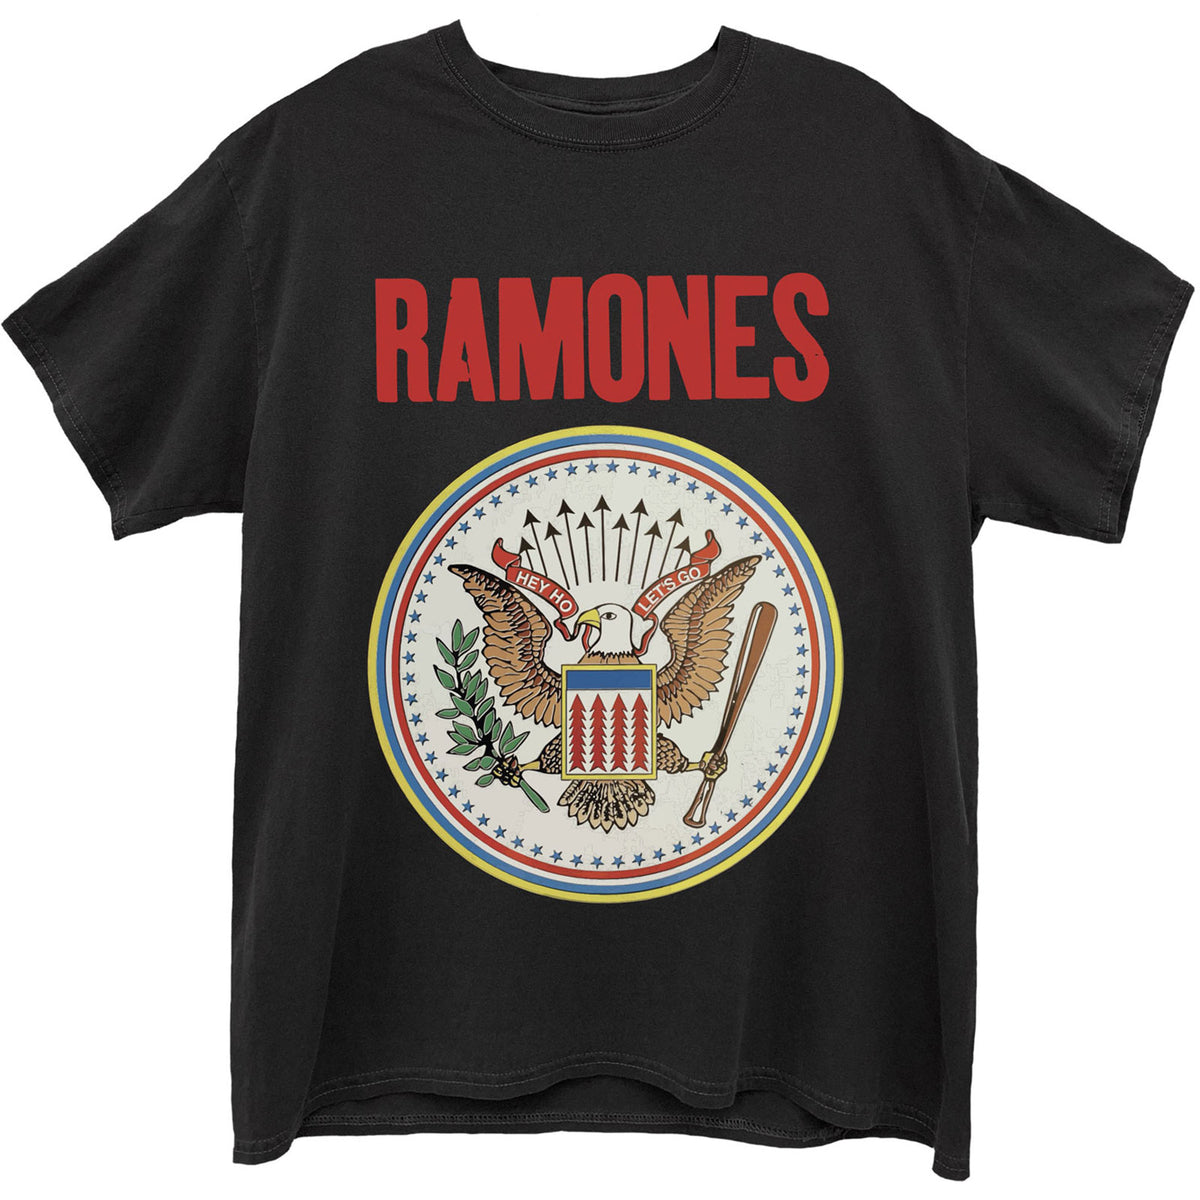 The Ramones Adult T-Shirt - Full Colour Seal - Official Licensed Design